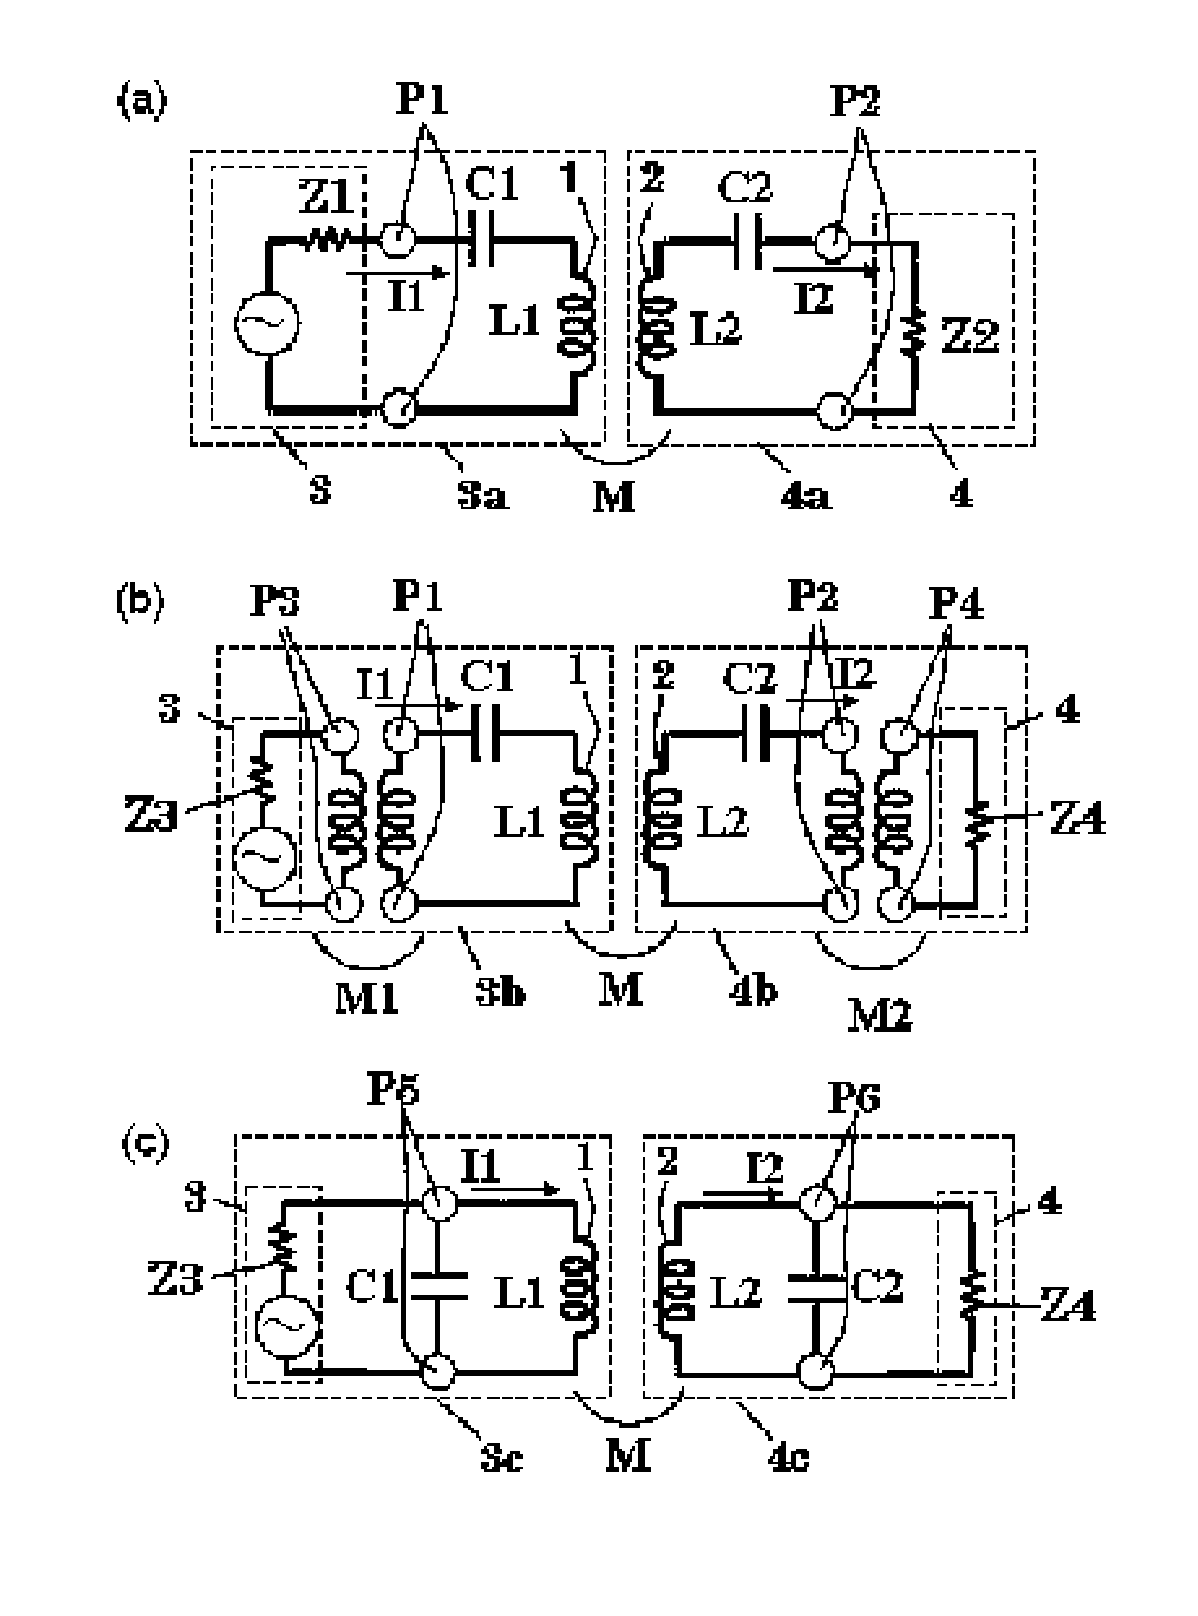 Induced power transmission circuit